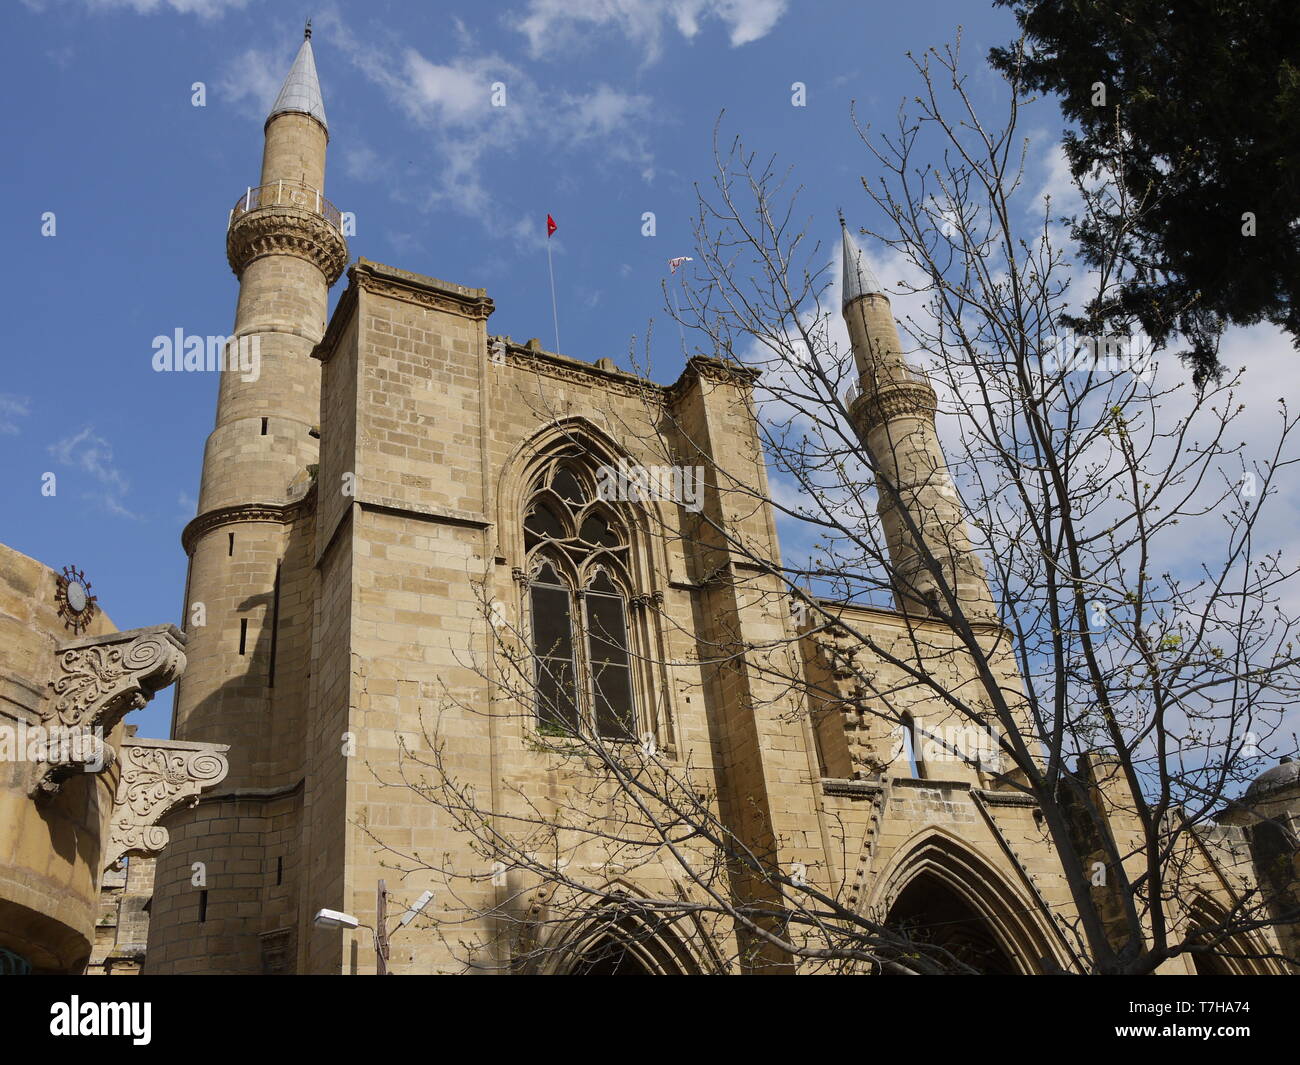 Selimiye Mosque historically known as Cathedral of Saint Sophia, is a former Roman Catholic cathedral converted into a mosque located in North Nicosia Stock Photo